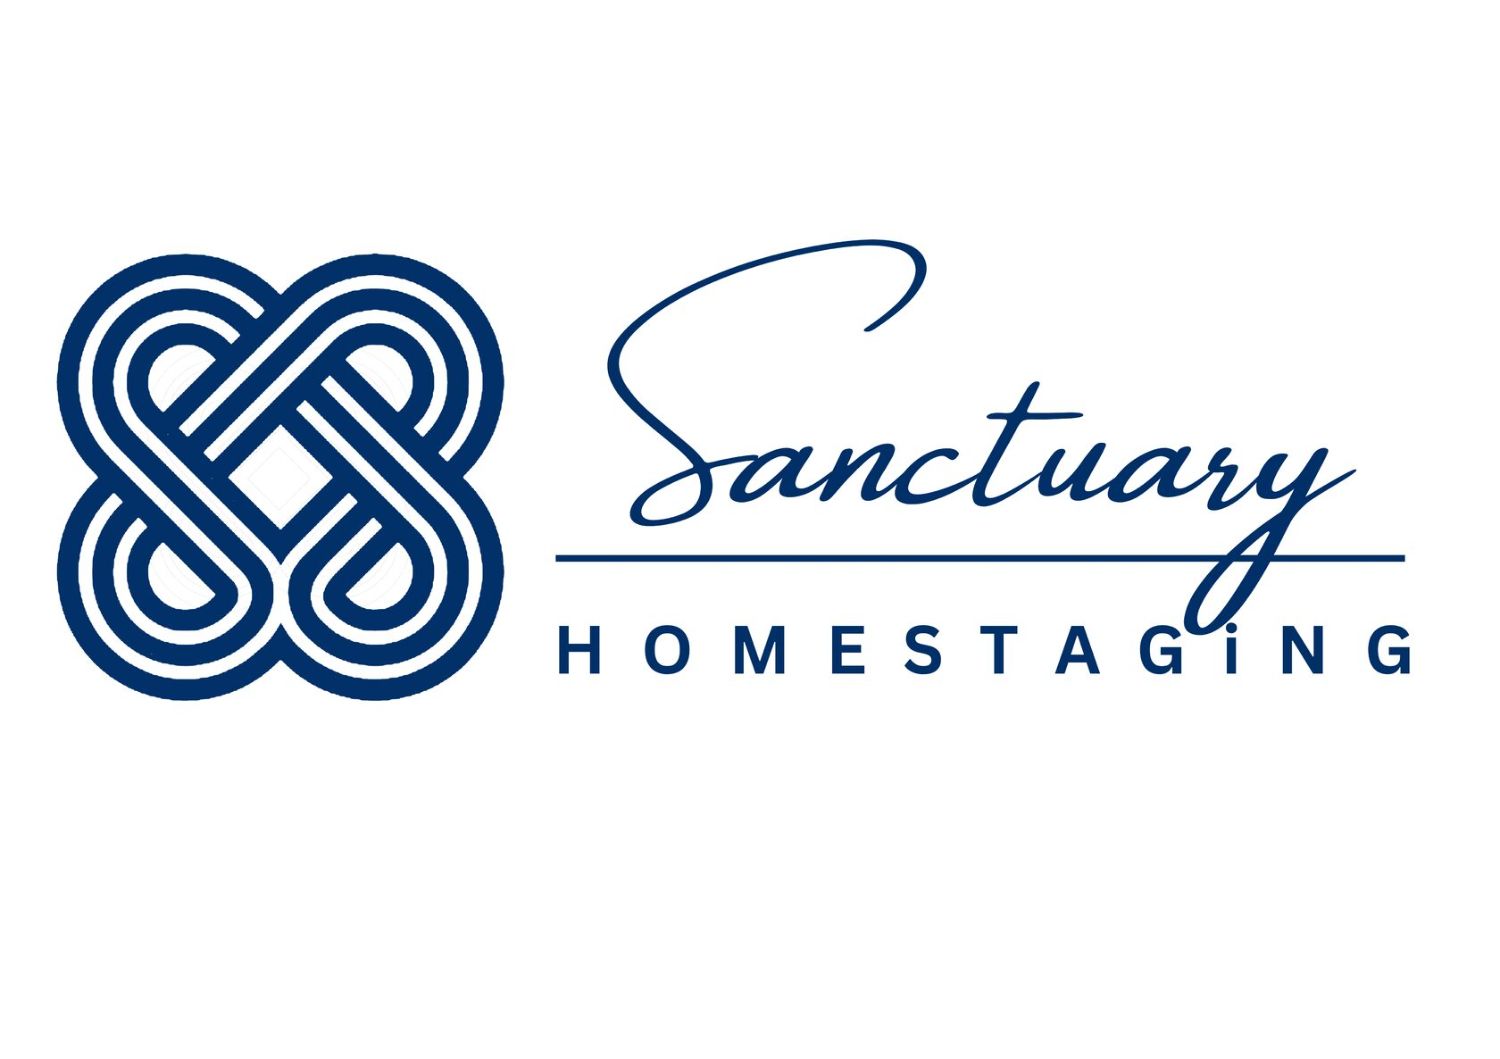 Sanctuary Home Staging logo and knot motif